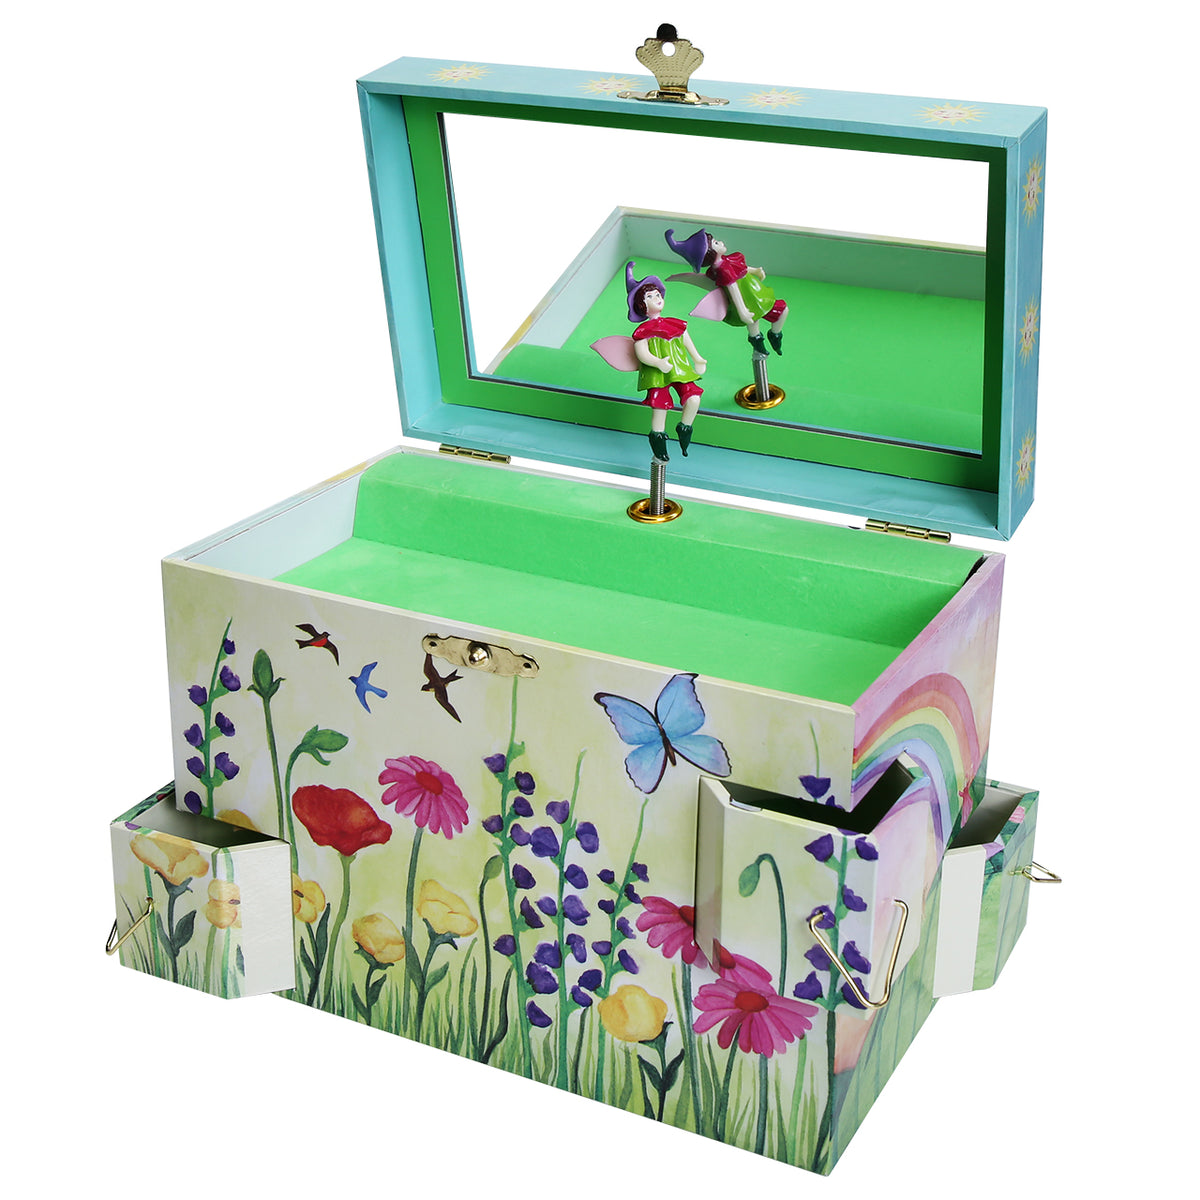 Summer Sunshine Musical Jewelry Box: Colorful Elegance and Melodic Delight